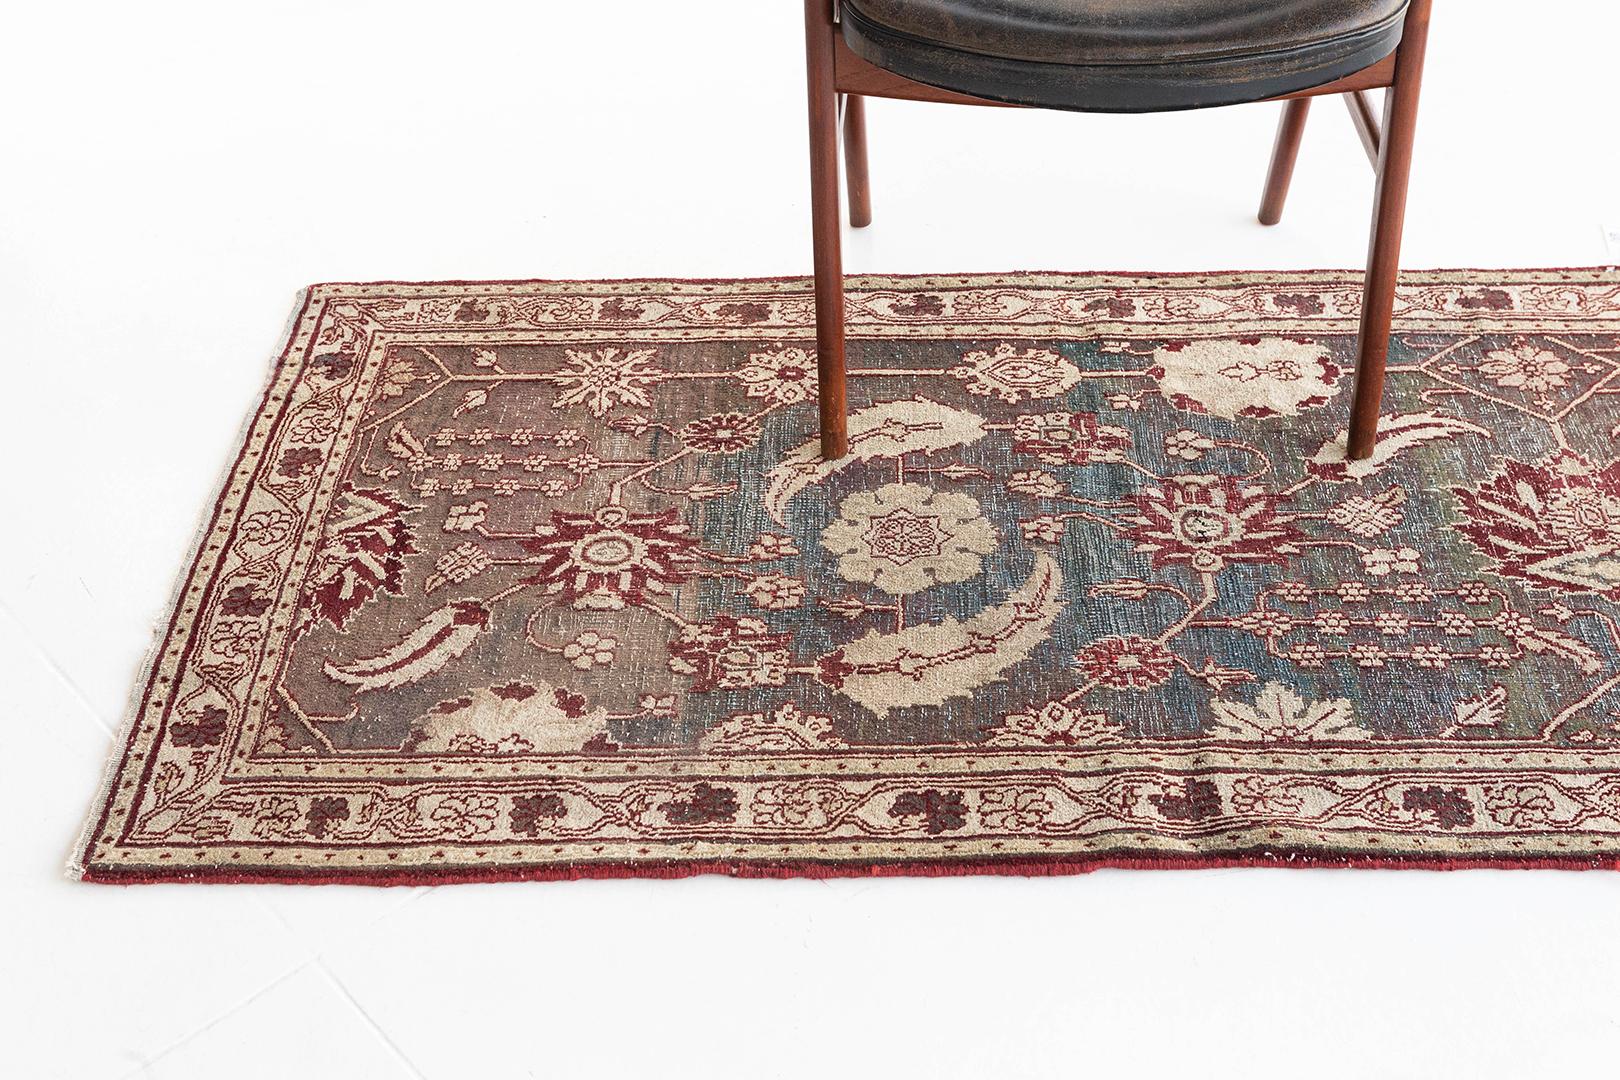 A gloriously dramatic Indo Agra rug features spiraling vines and florets. Known for their unique palette of color, nature schemes are flaunted. This masterwork of art gives a light and ethereal appearance which is gorgeous and impressive in any